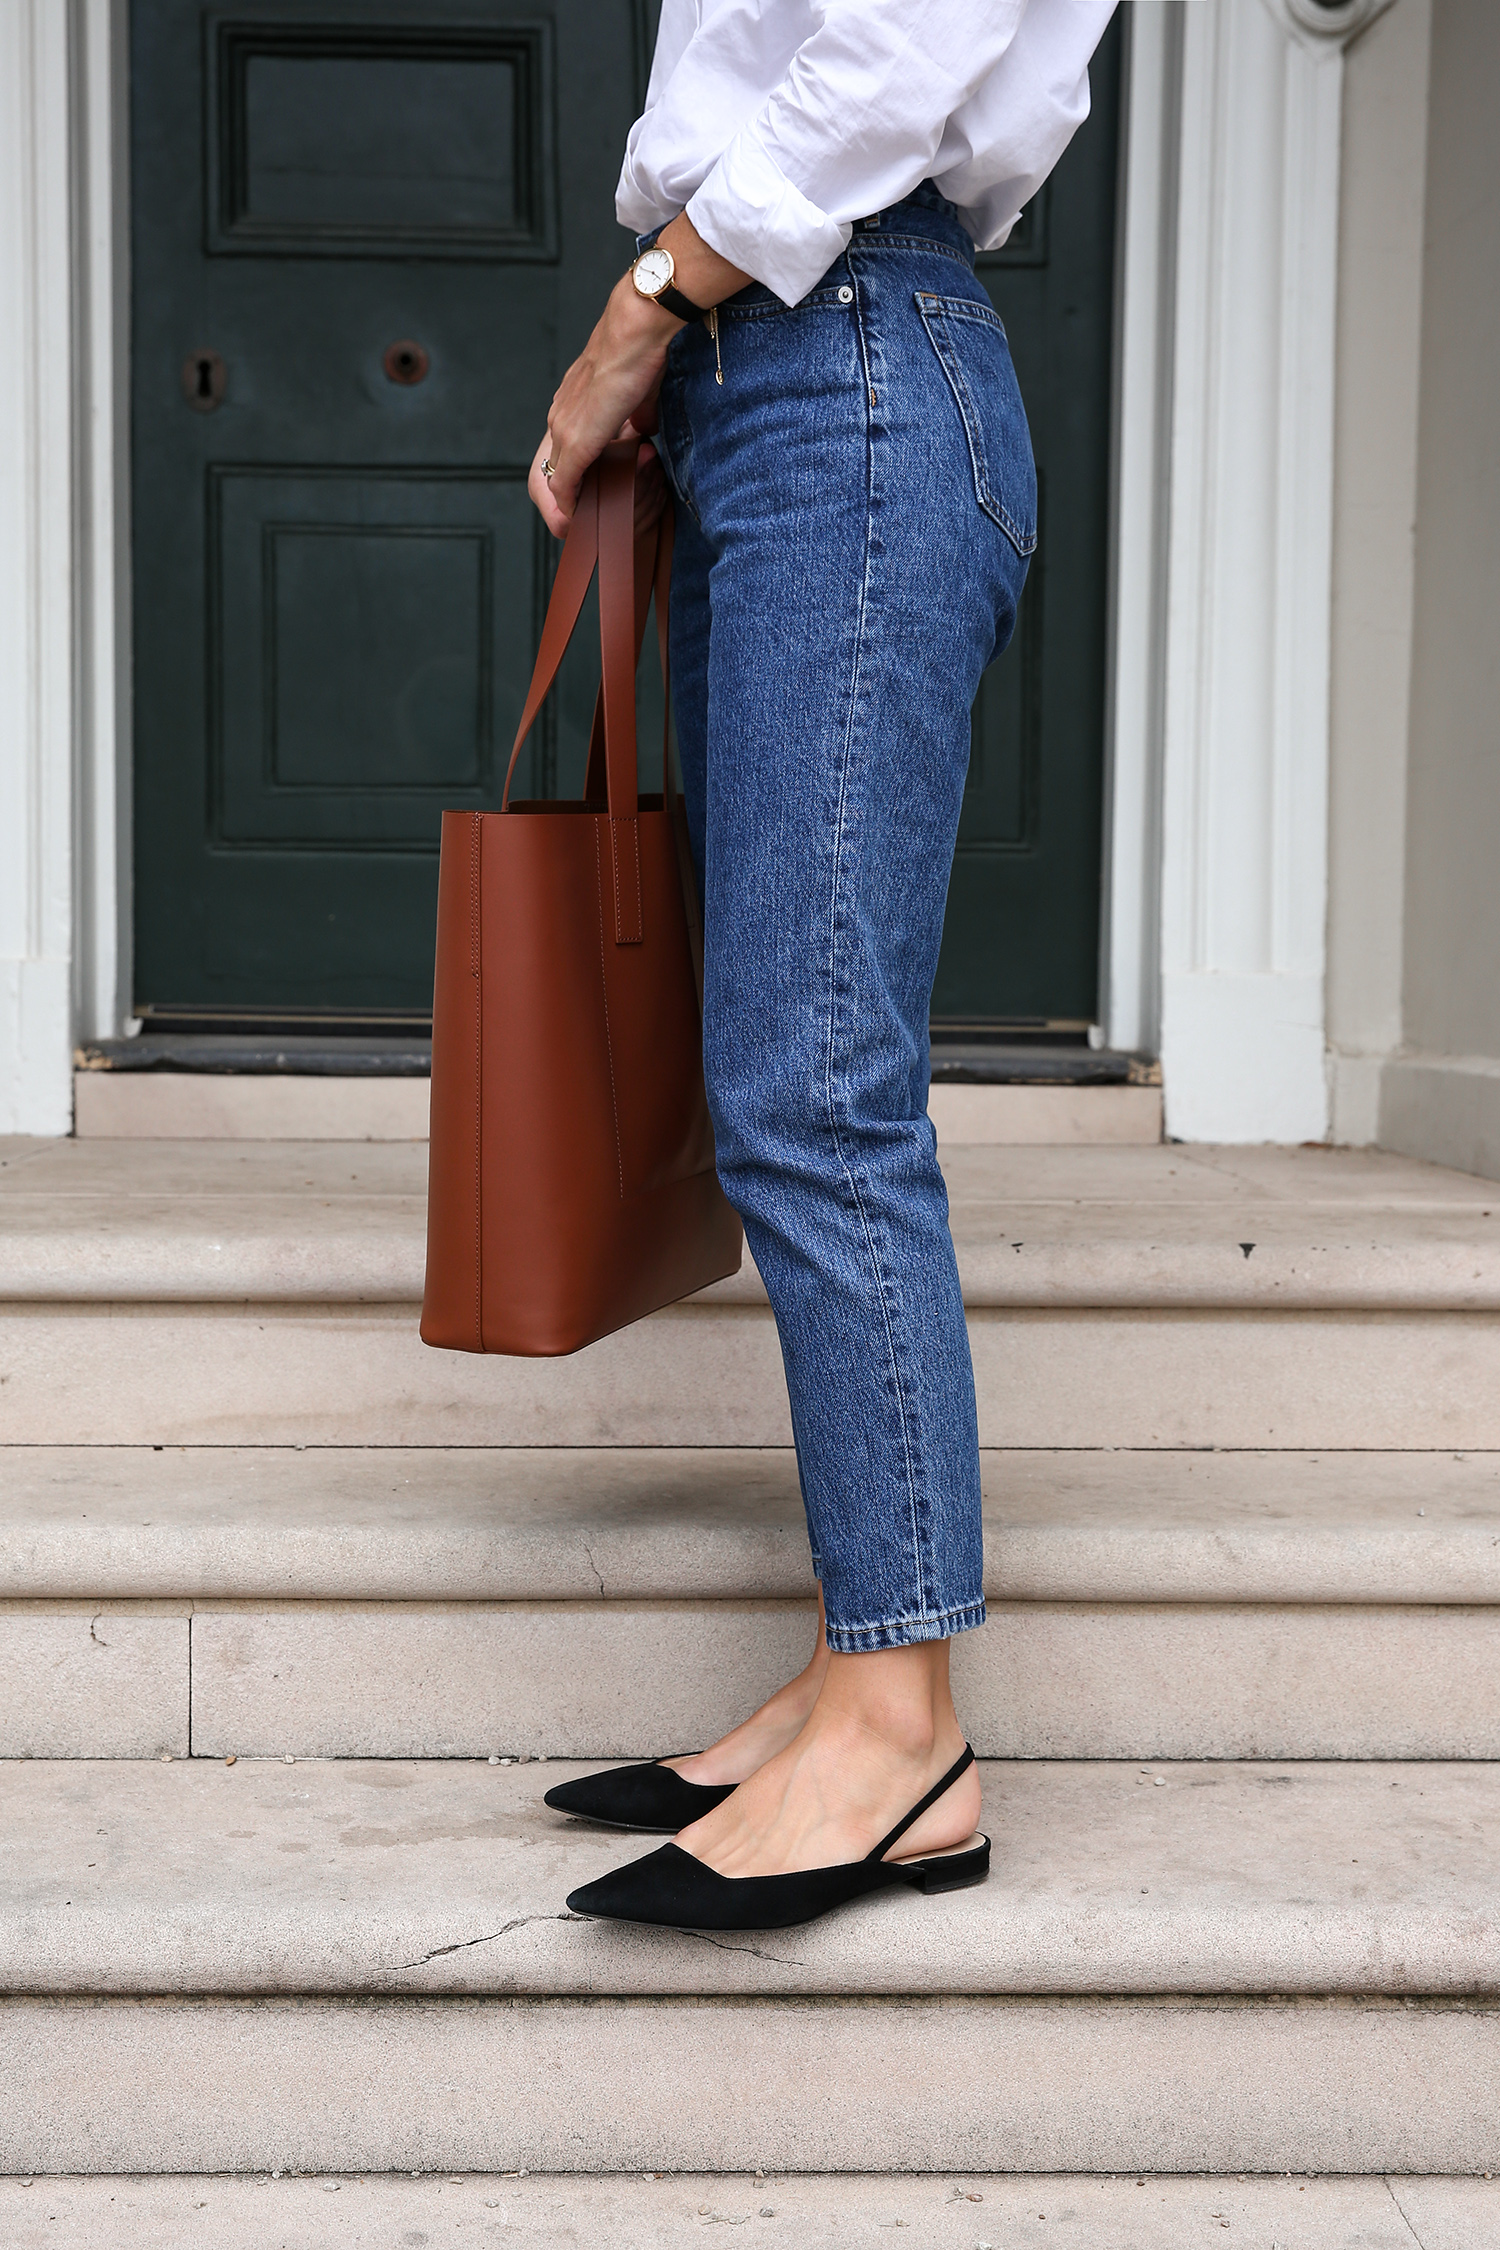 Everlane 90s Cheeky Straight Jean Review